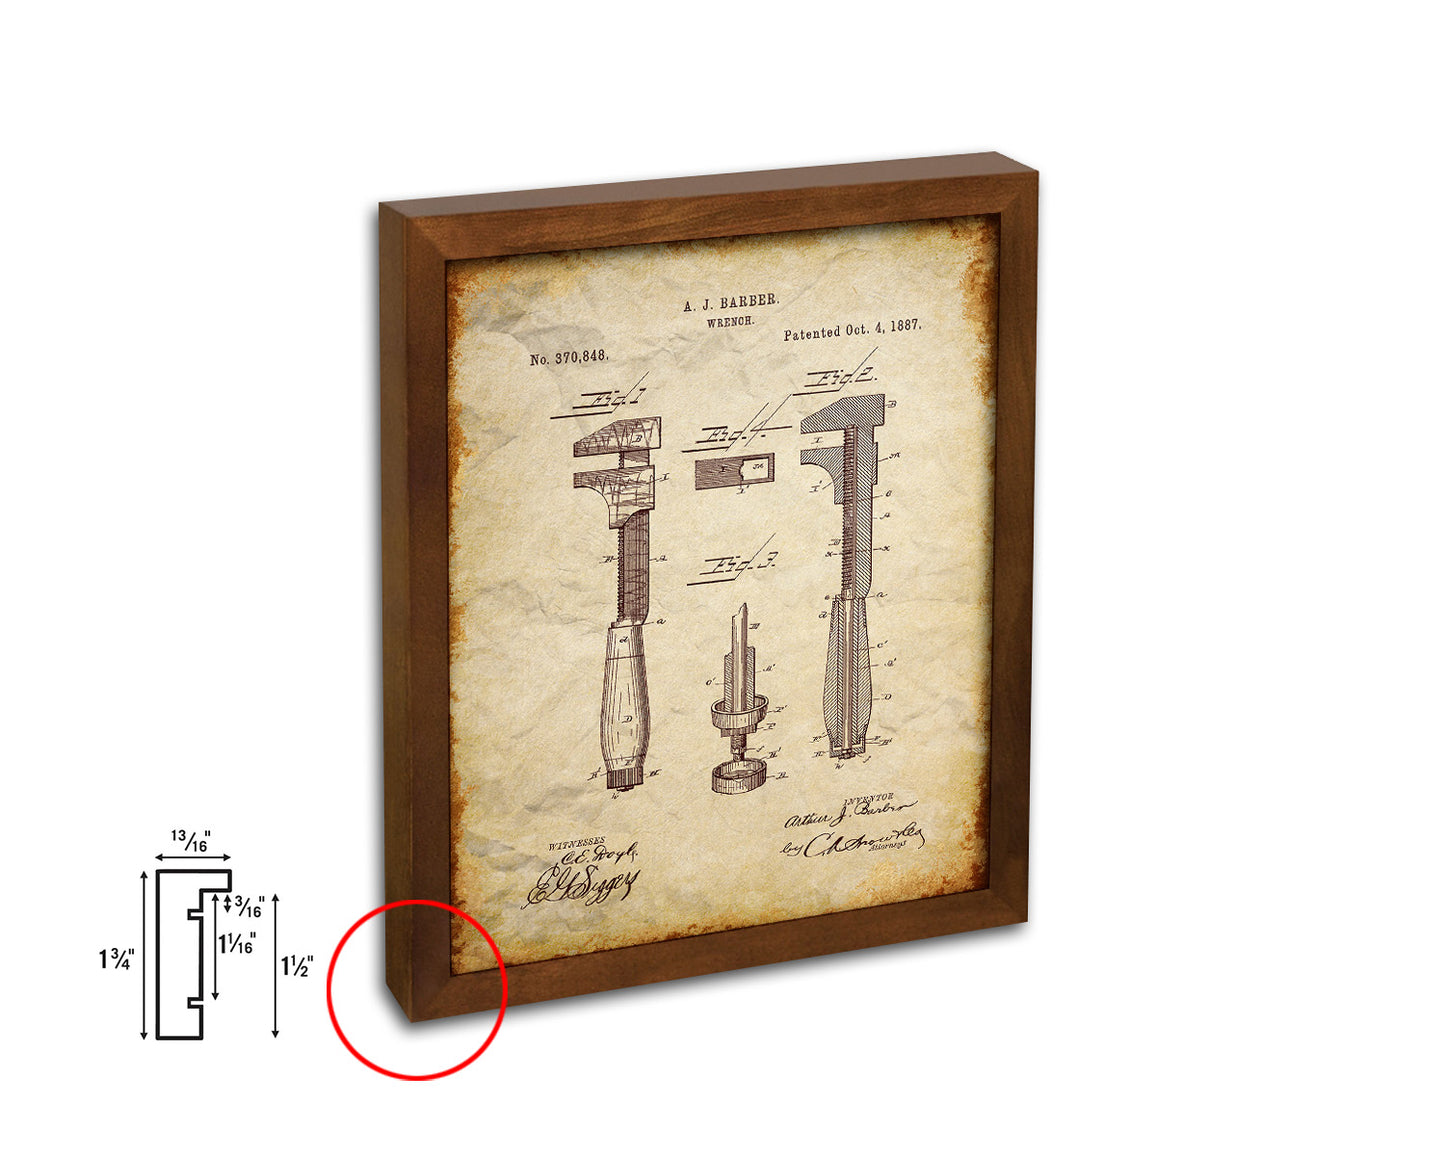 Wrench Tools Vintage Patent Artwork Walnut Frame Gifts